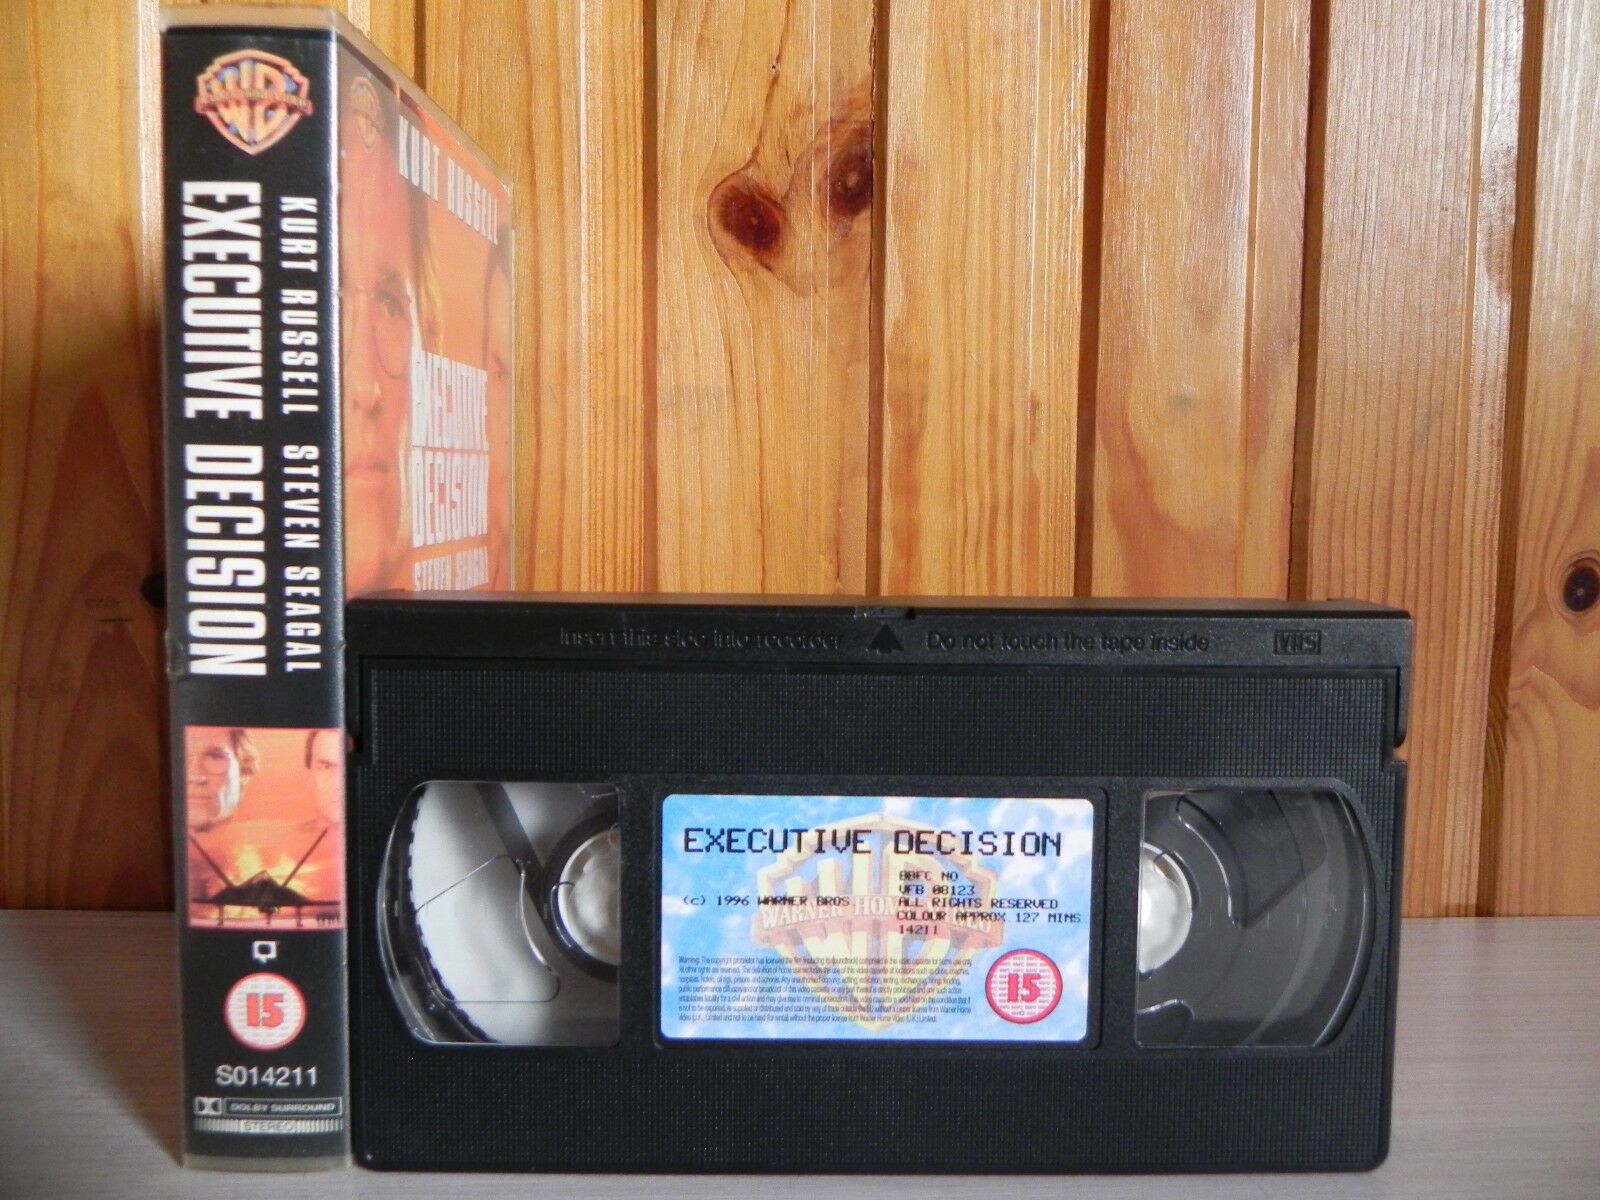 Executive Decision: Airplane Hijack Action - Kurt Russell - Steven Seagal - VHS-